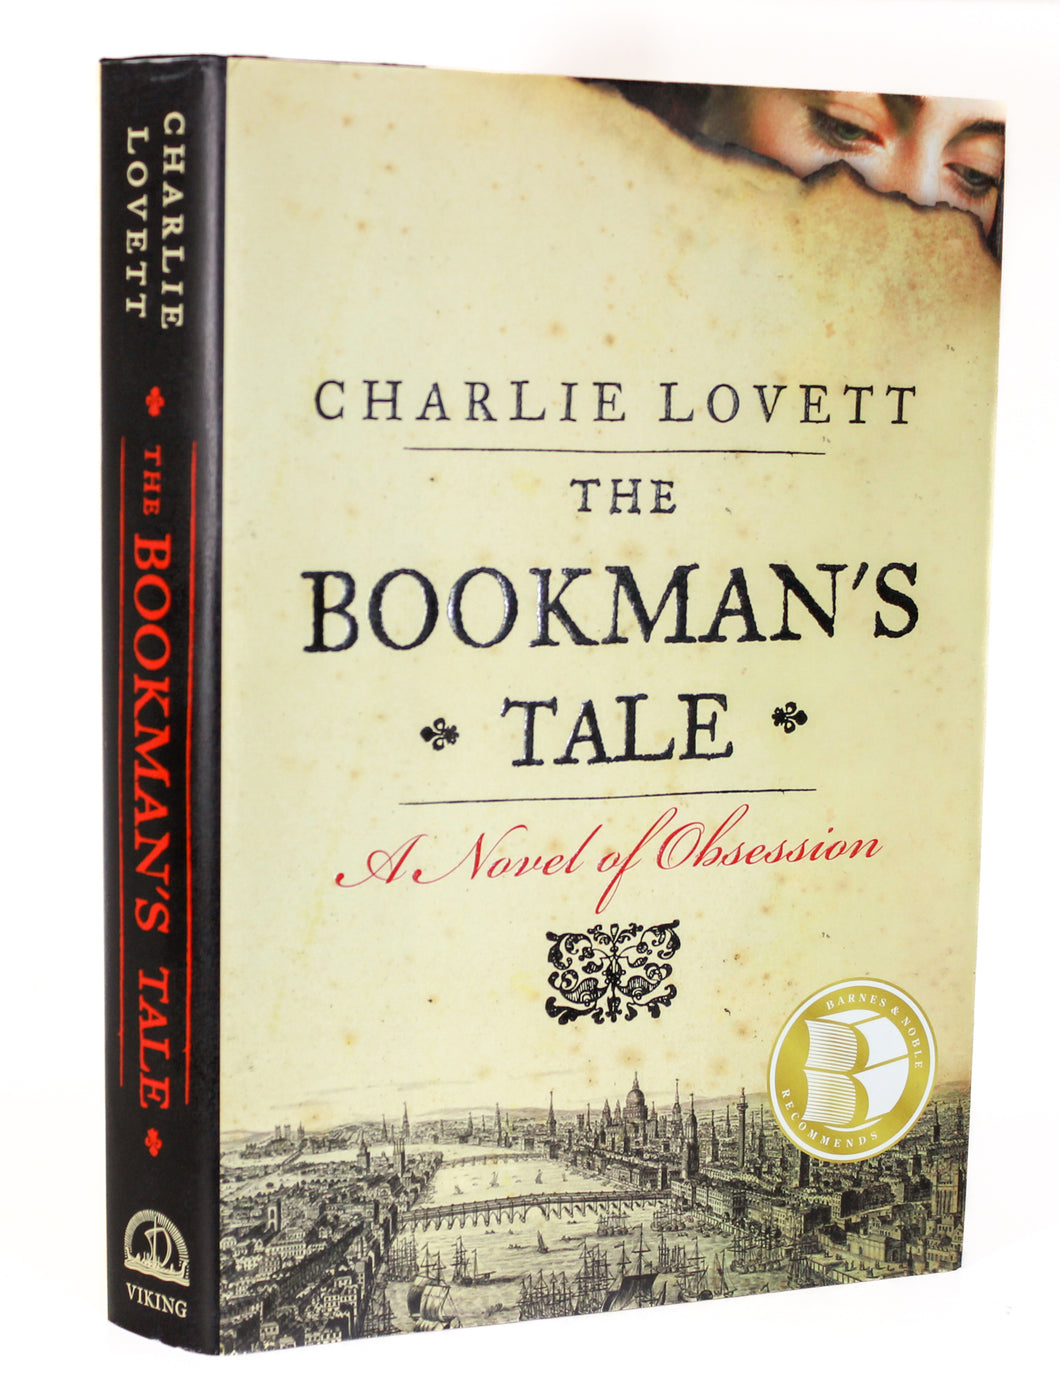 The Bookman's Tale by Charlie Lovett 1st First Edition Hardcover Hardback Book